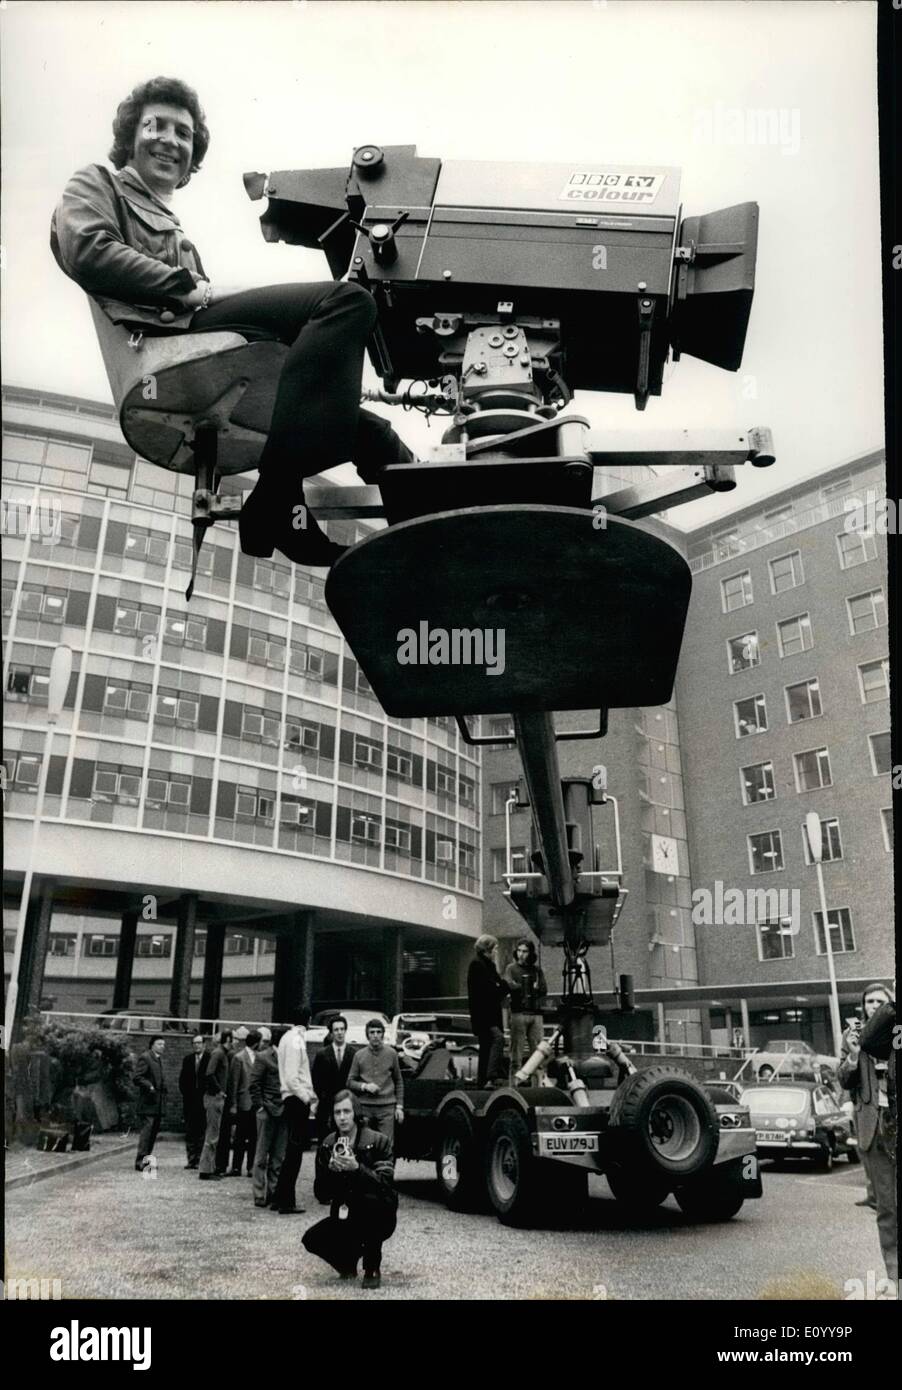 Nov. 11, 1971 - Tom Jones At The B.B.C.: Tom Jones arrived at the BBC Television Centre today to discuss plans for his first-ever one-man show - a BBC-1 Christmas Special. Tom had a good look at the giant thirty-foot camera crane that will be used on the show. Photo shows Tom Jones pictured high above the ground on the thirty-foot camera crane, at the BBC Television Centre today. Stock Photo